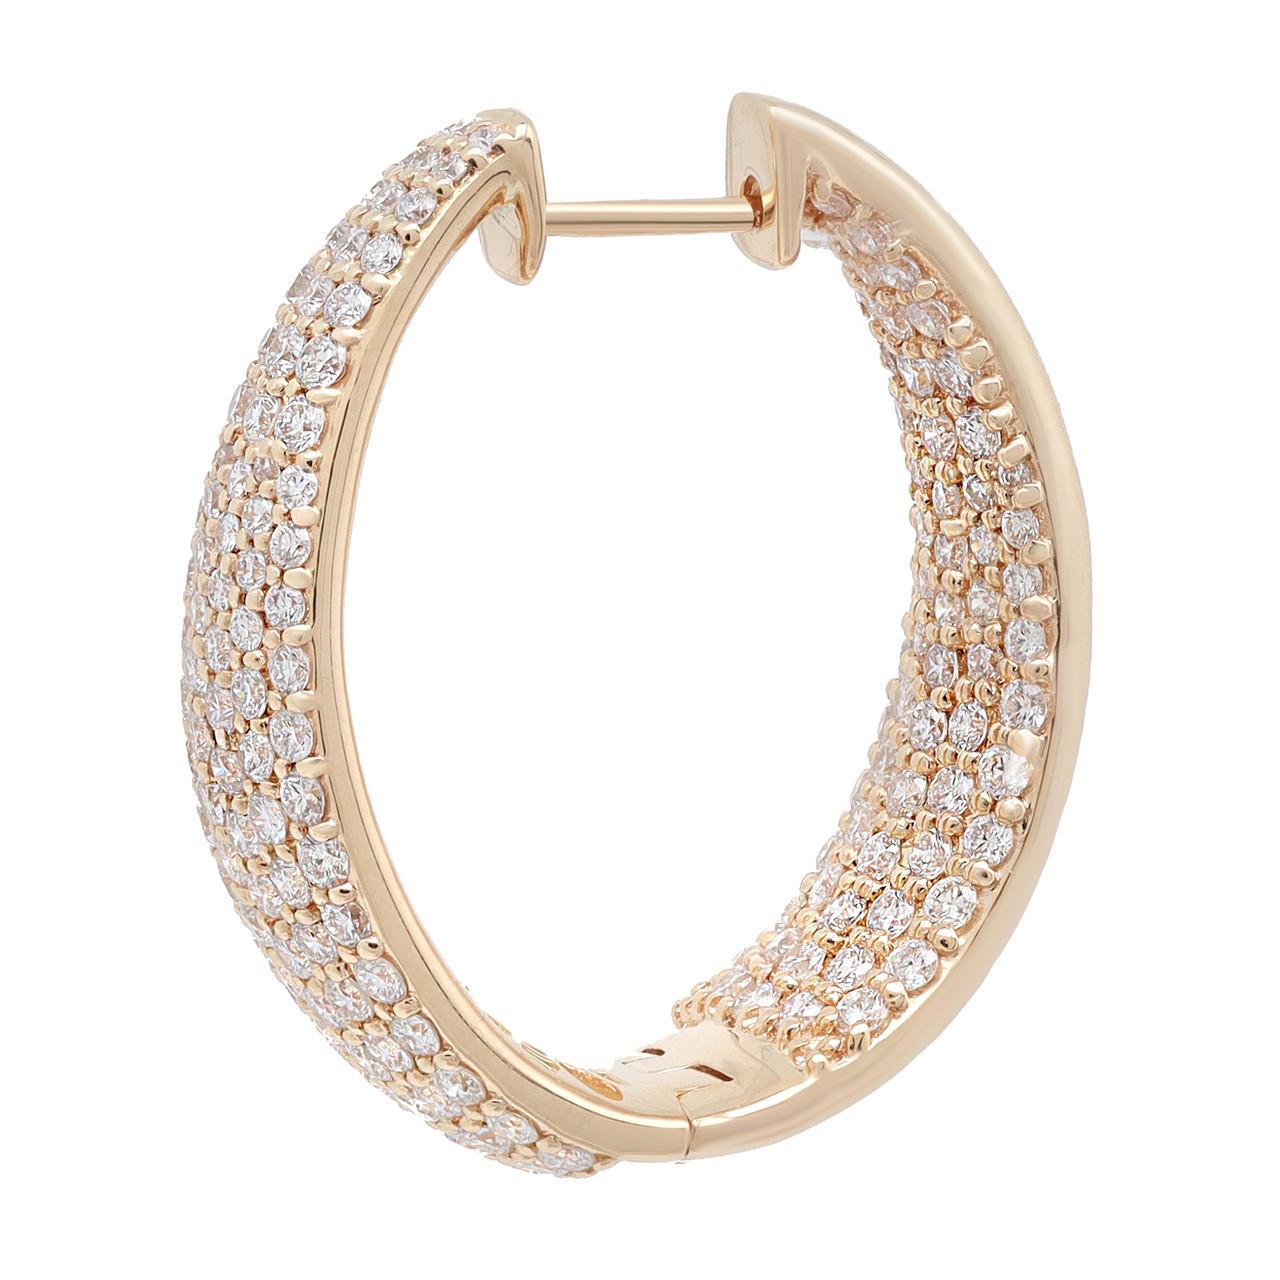 Embrace opulence and radiate sophistication with these stunning large Round Cut Diamond Hoop Earrings, crafted in 18K yellow gold. These earrings exude a warm and luxurious allure with their magnificent design and captivating diamonds. Each hoop